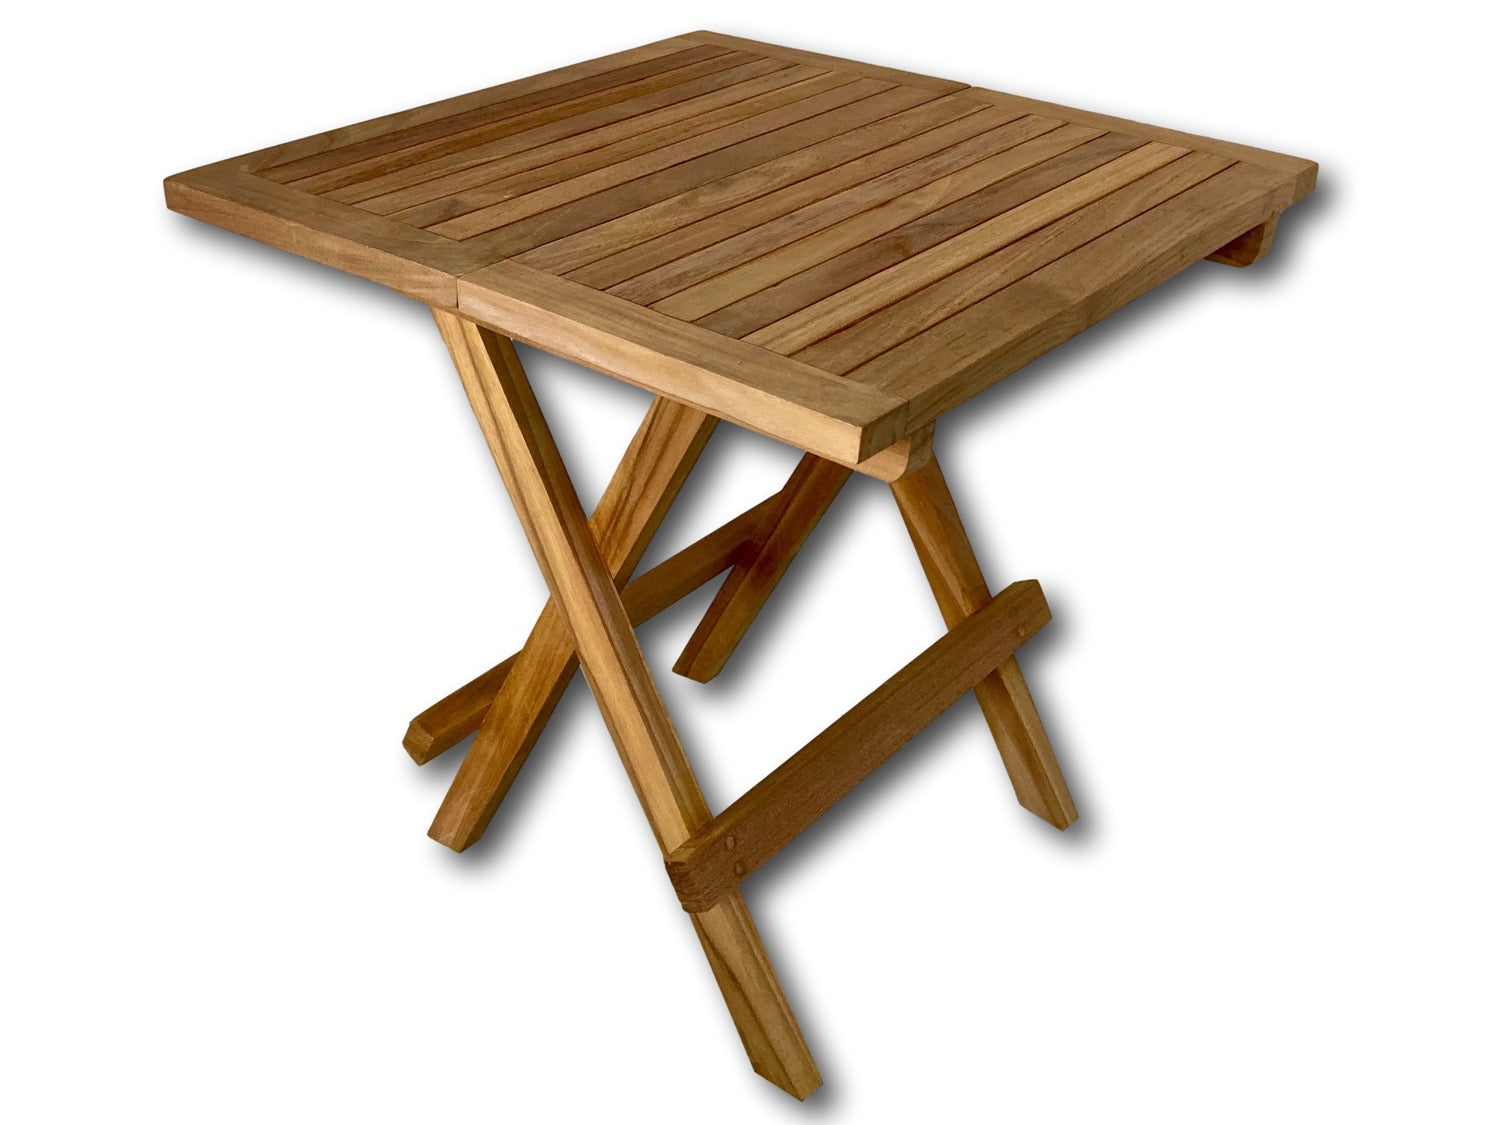 Square teak outdoor garden folding coffee and picnic table